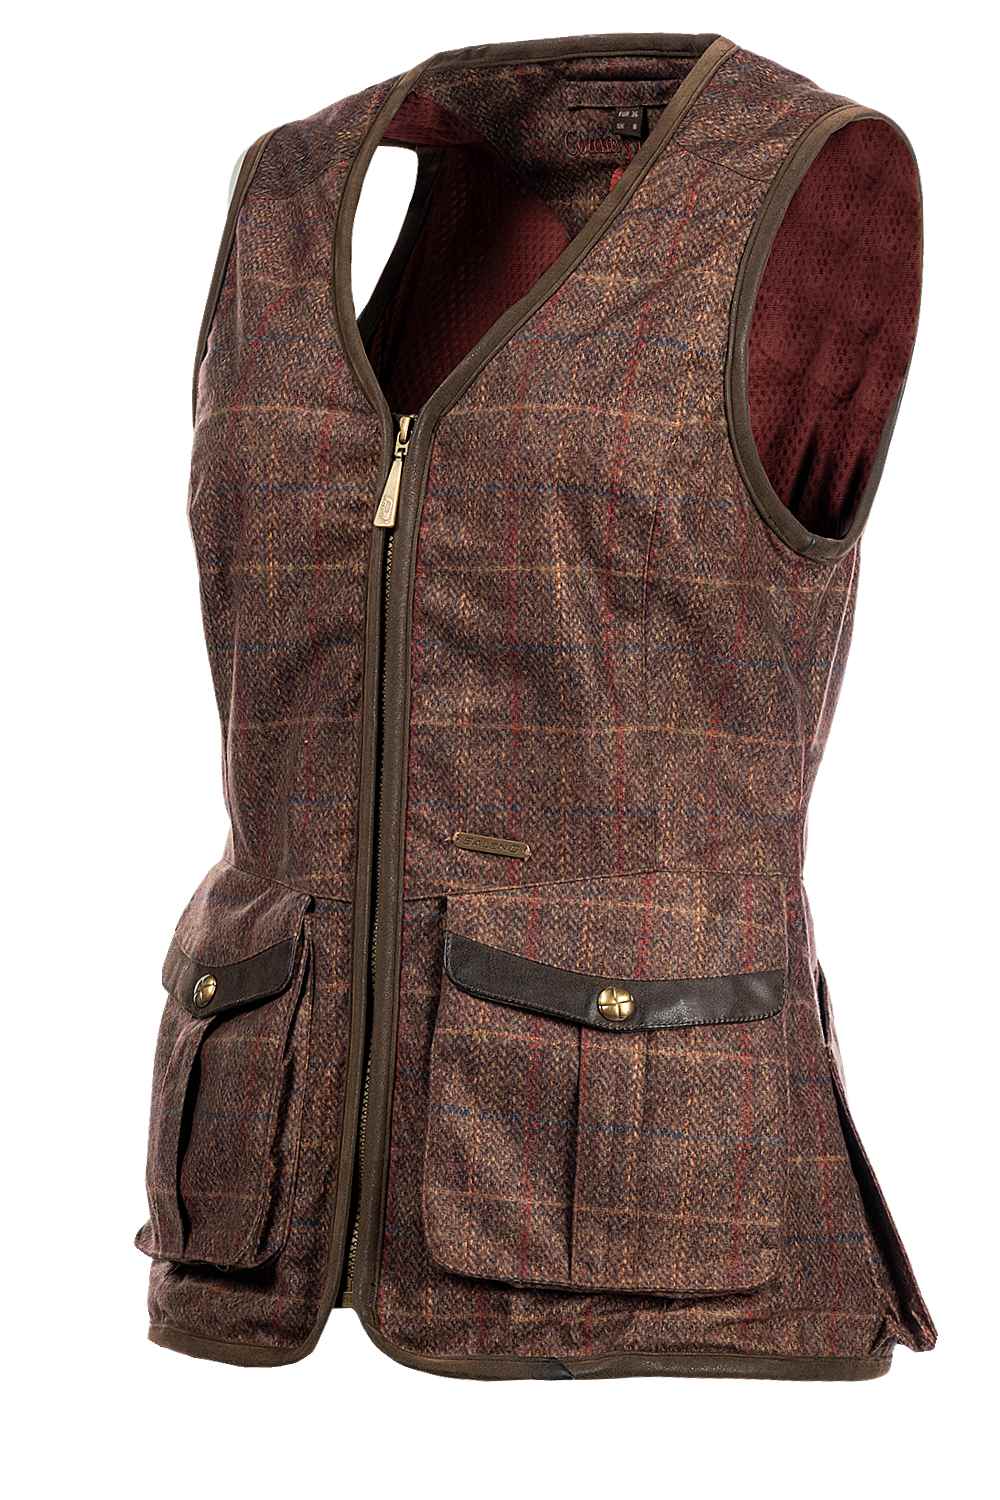 Baleno Womens Kenwood Shooting Vest in Check Brown 